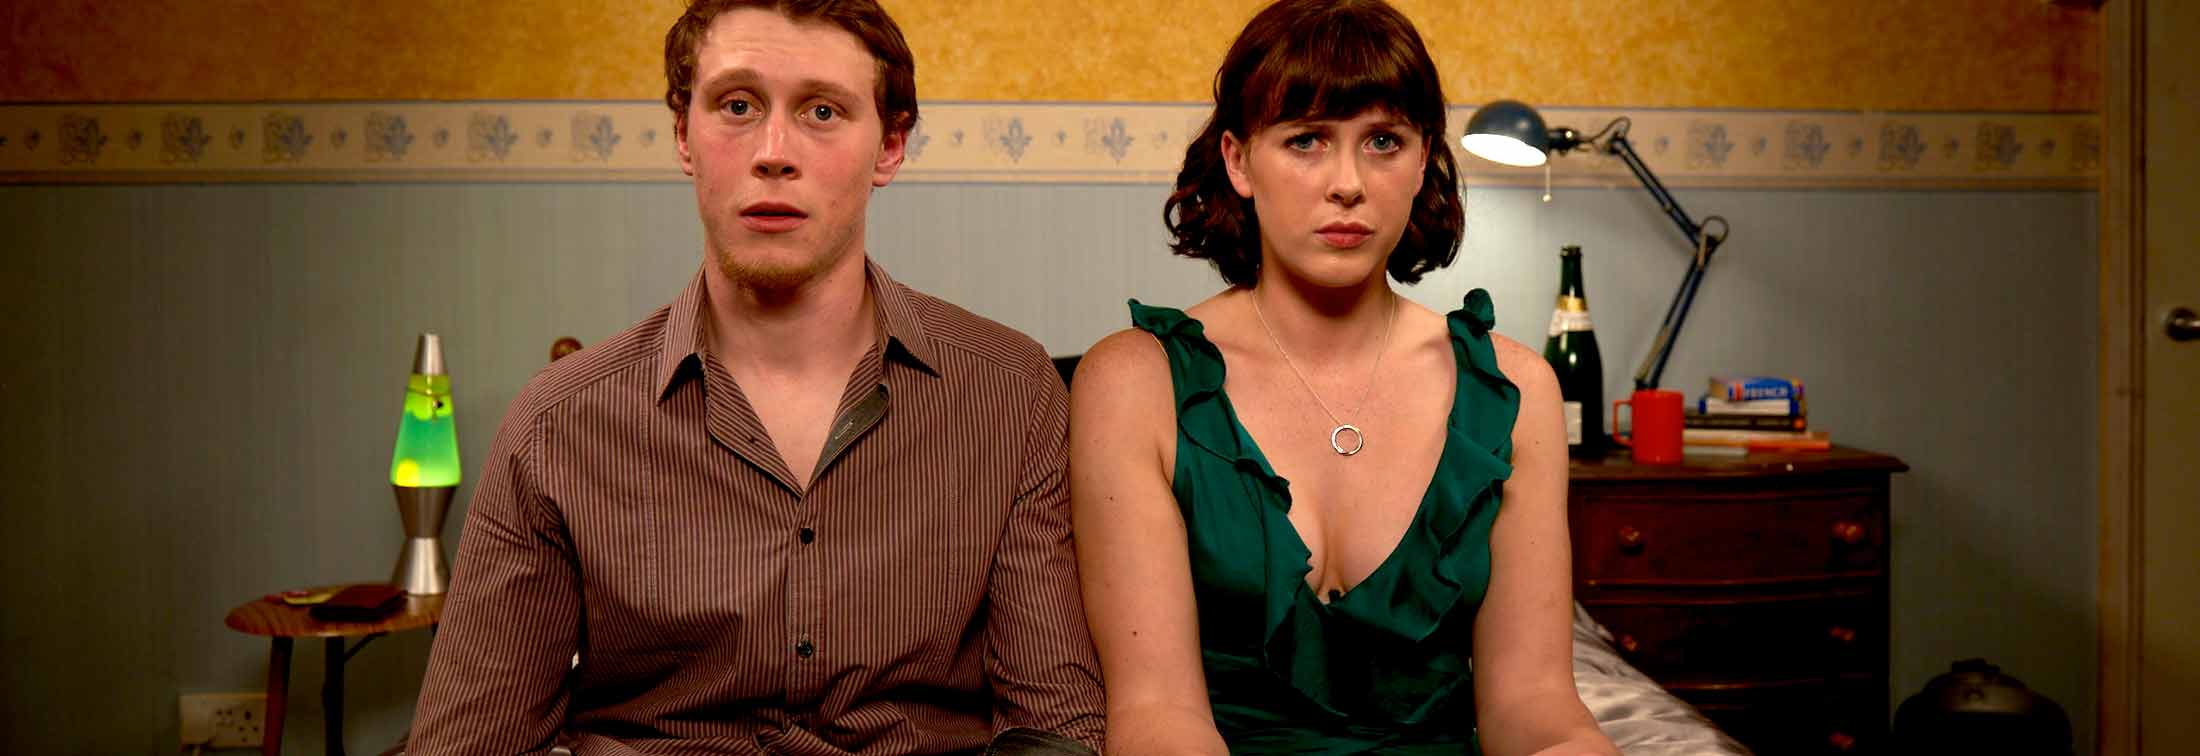 A Guide to Second Date Sex - A quintessentially awkward British romantic comedy